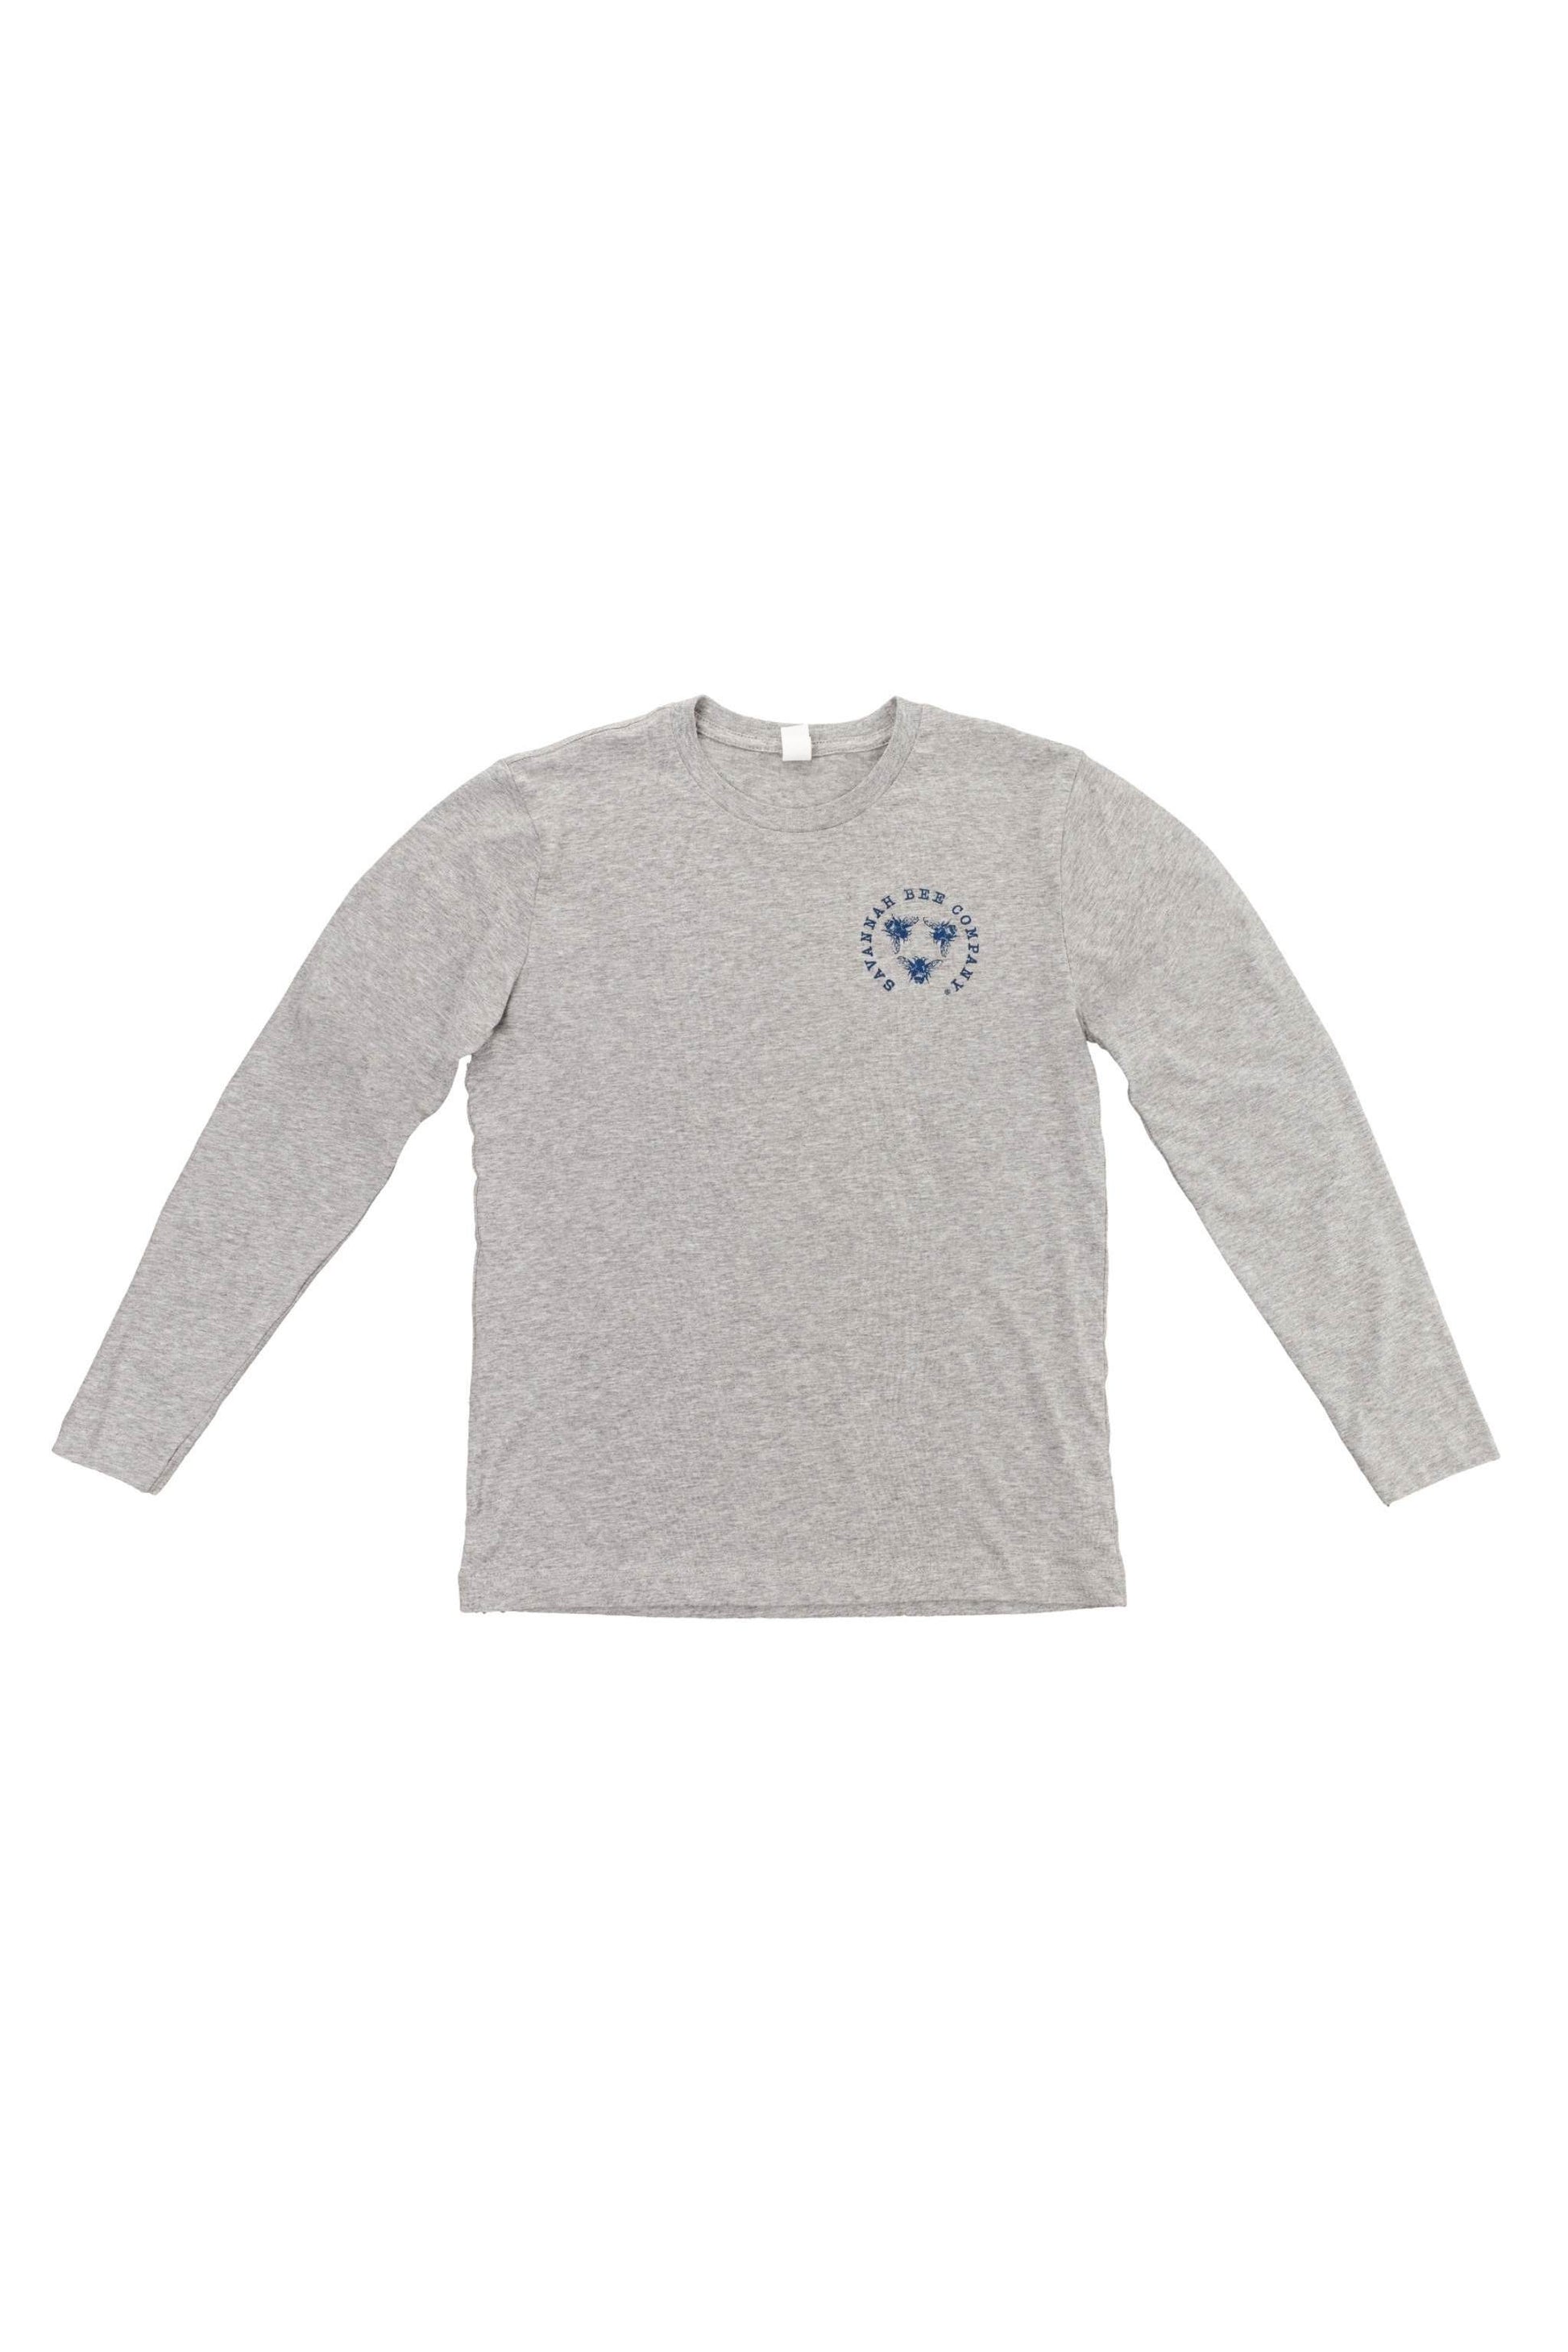 Long sleeeve, heathered grey, crew neck t shirt. The front has the Savannah Bee Company navy logo on the front right. 